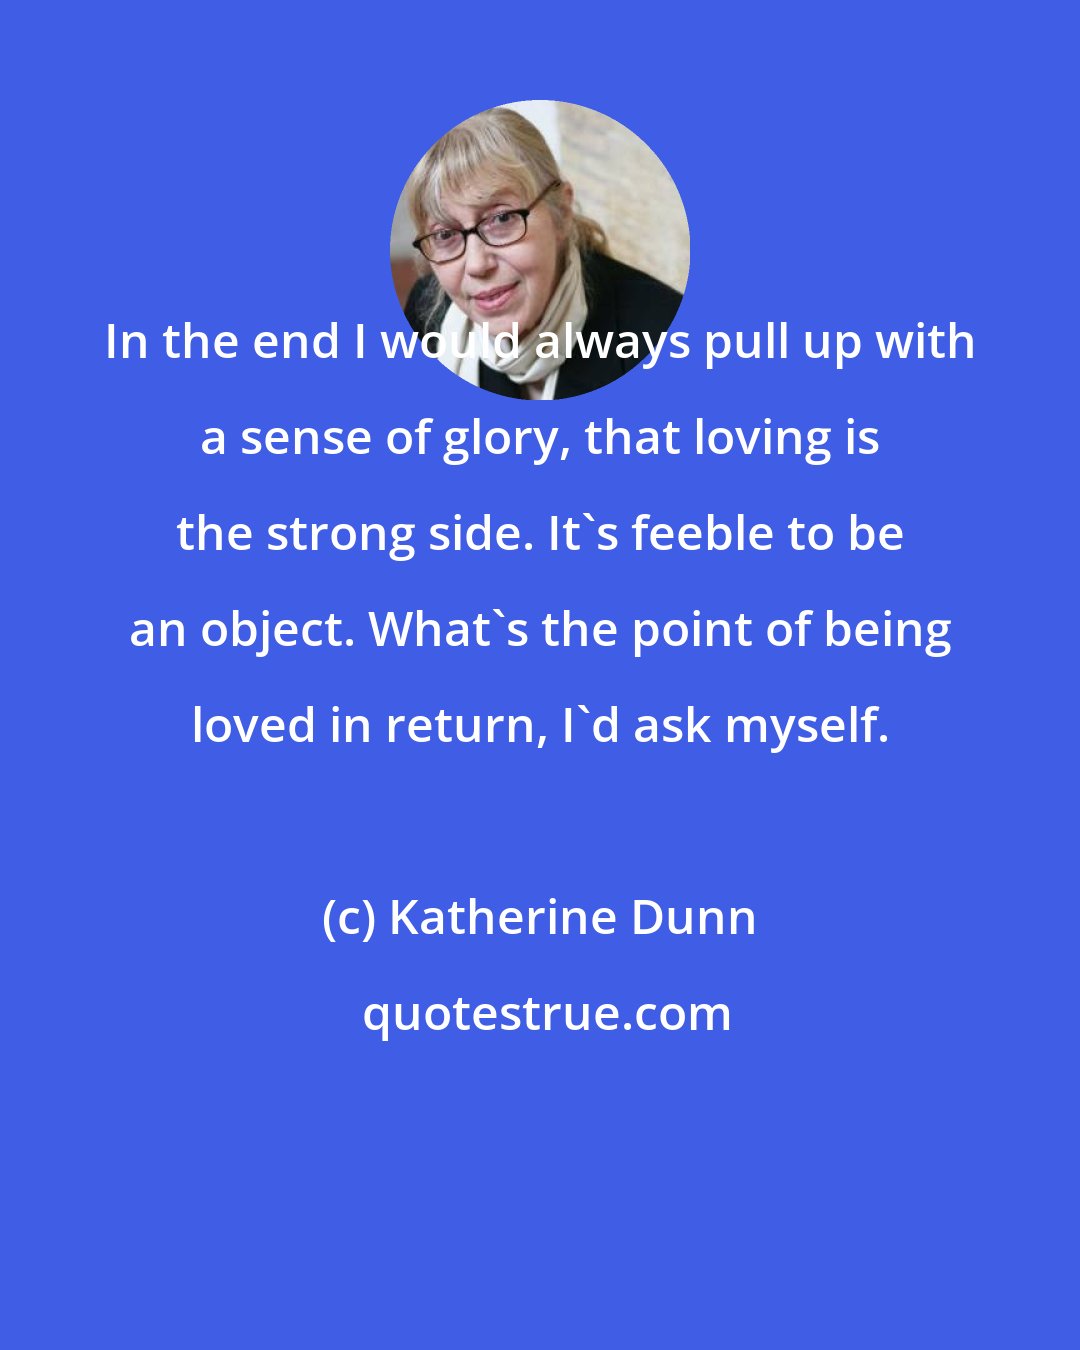 Katherine Dunn: In the end I would always pull up with a sense of glory, that loving is the strong side. It's feeble to be an object. What's the point of being loved in return, I'd ask myself.